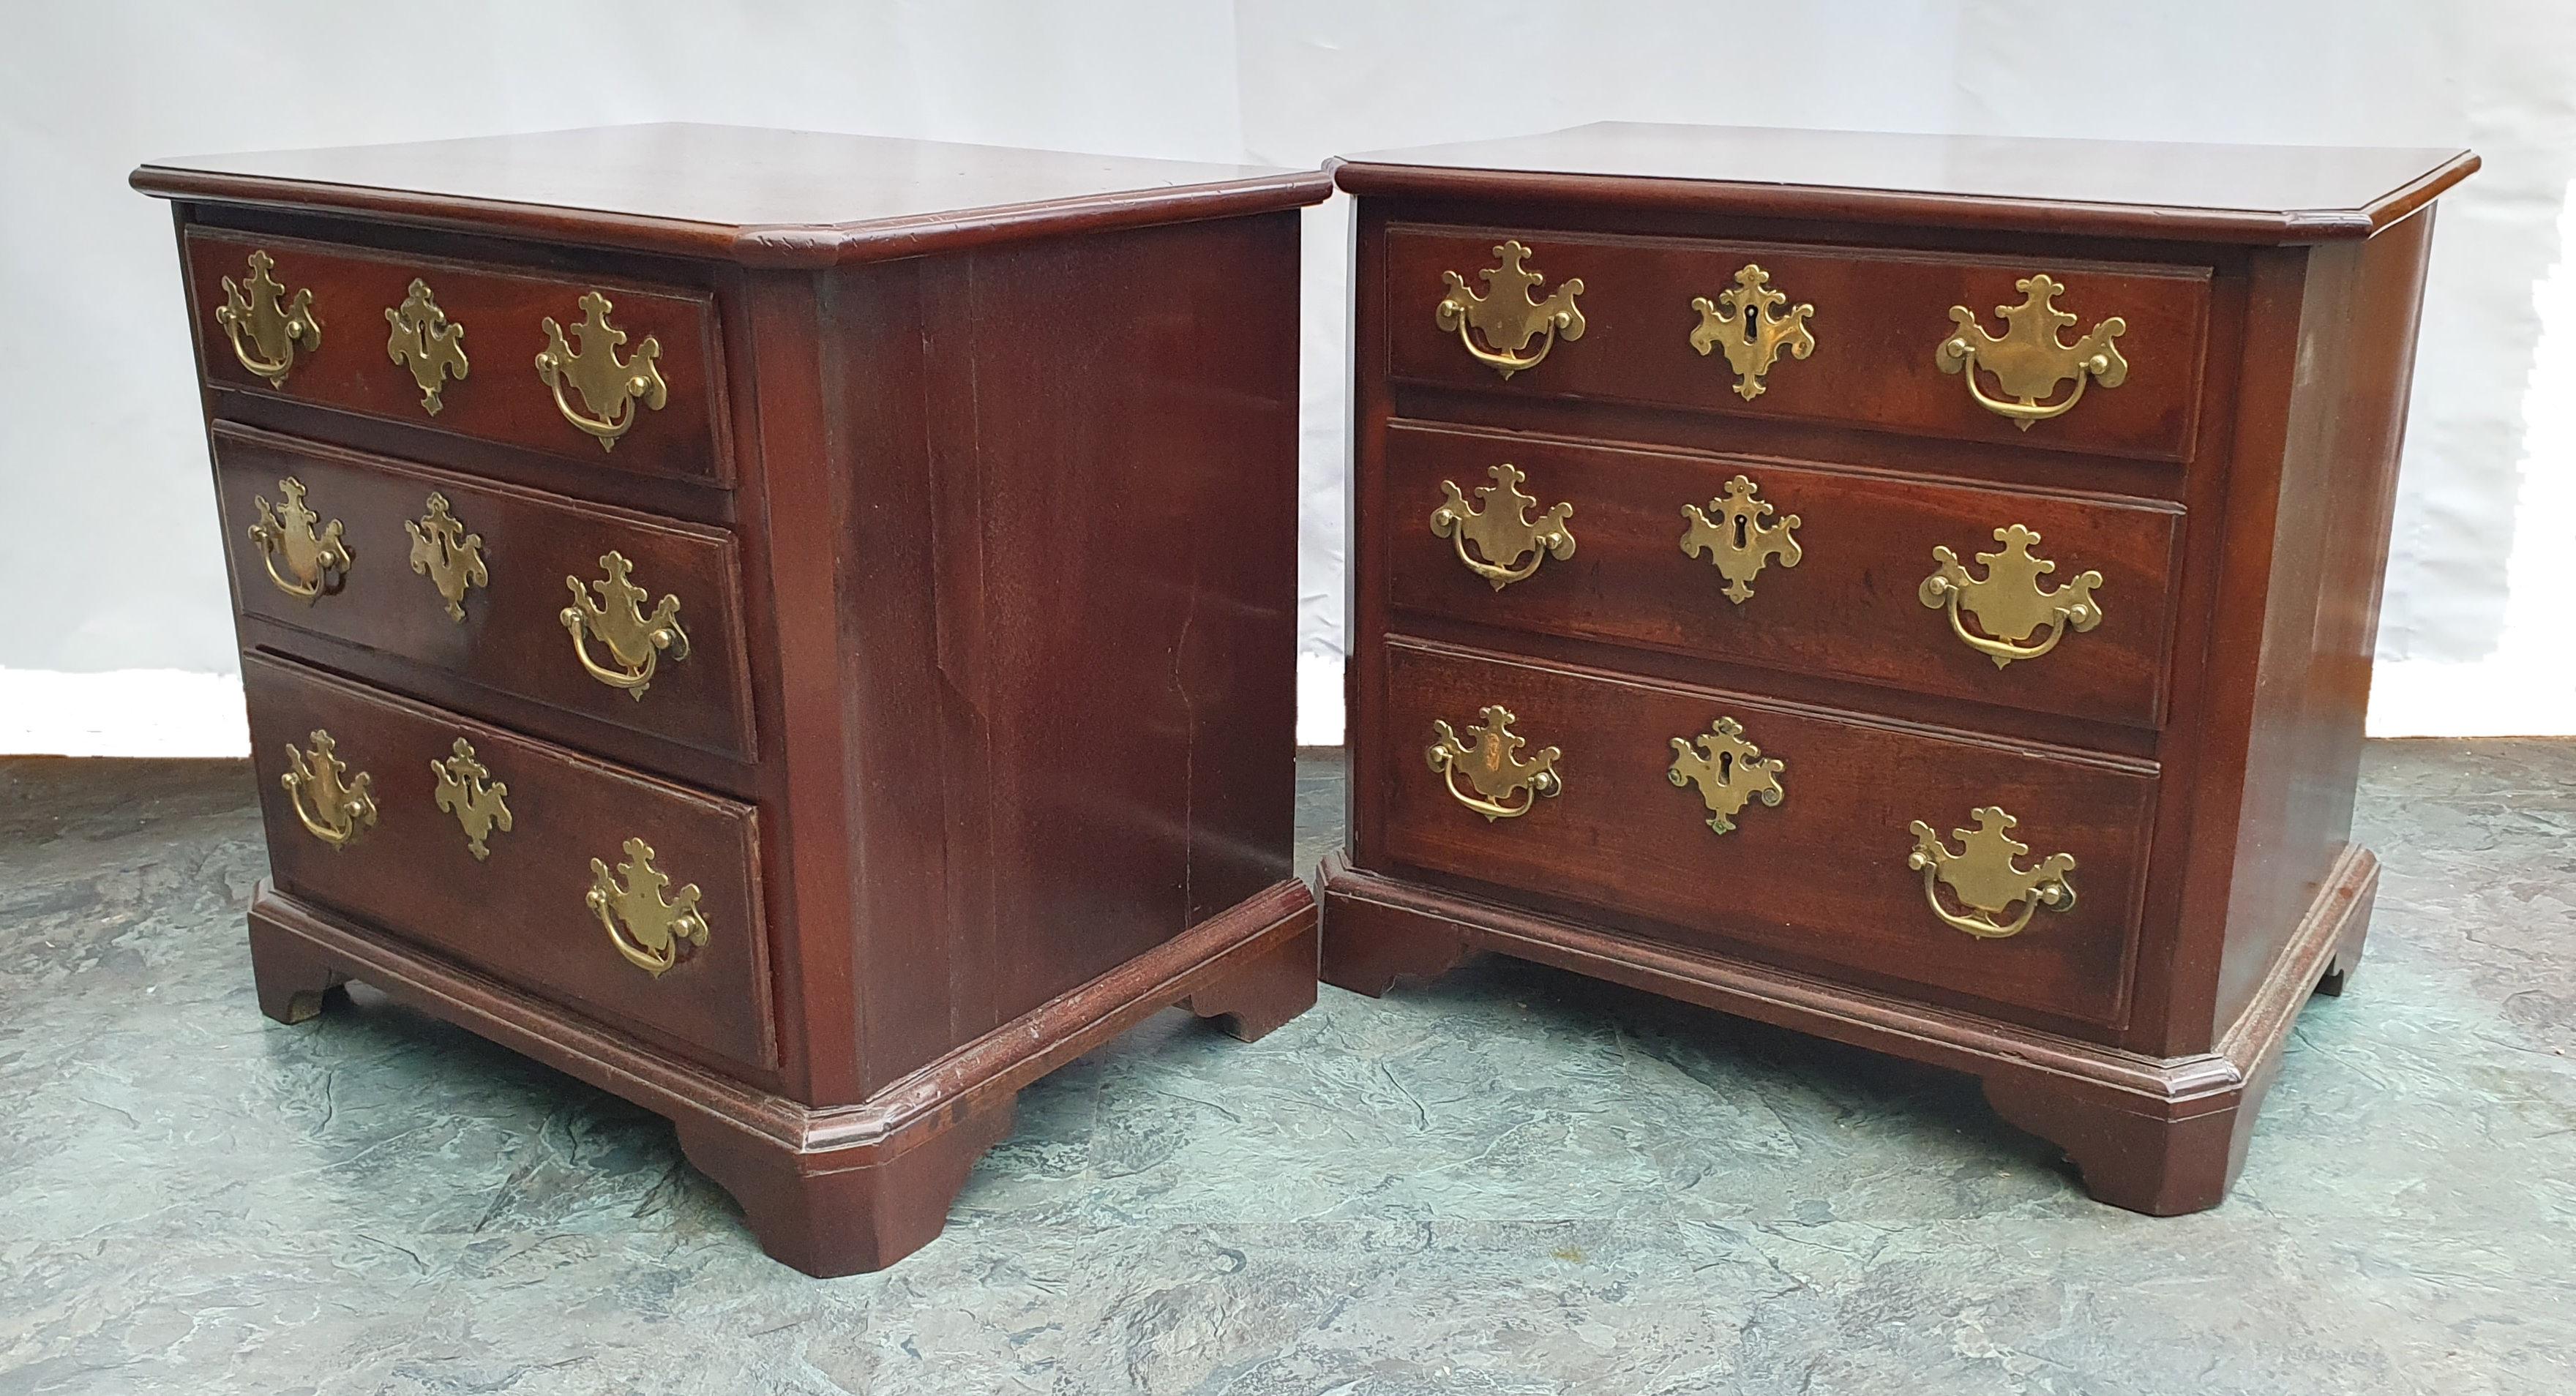 This lovely pair of 18th Century mahogany chests feature 3 graduating drawers with ornate brass handles and escutcheons. They also have oak drawer linings, which were prevalent in better quality furniture at that time. The feet of the chests were